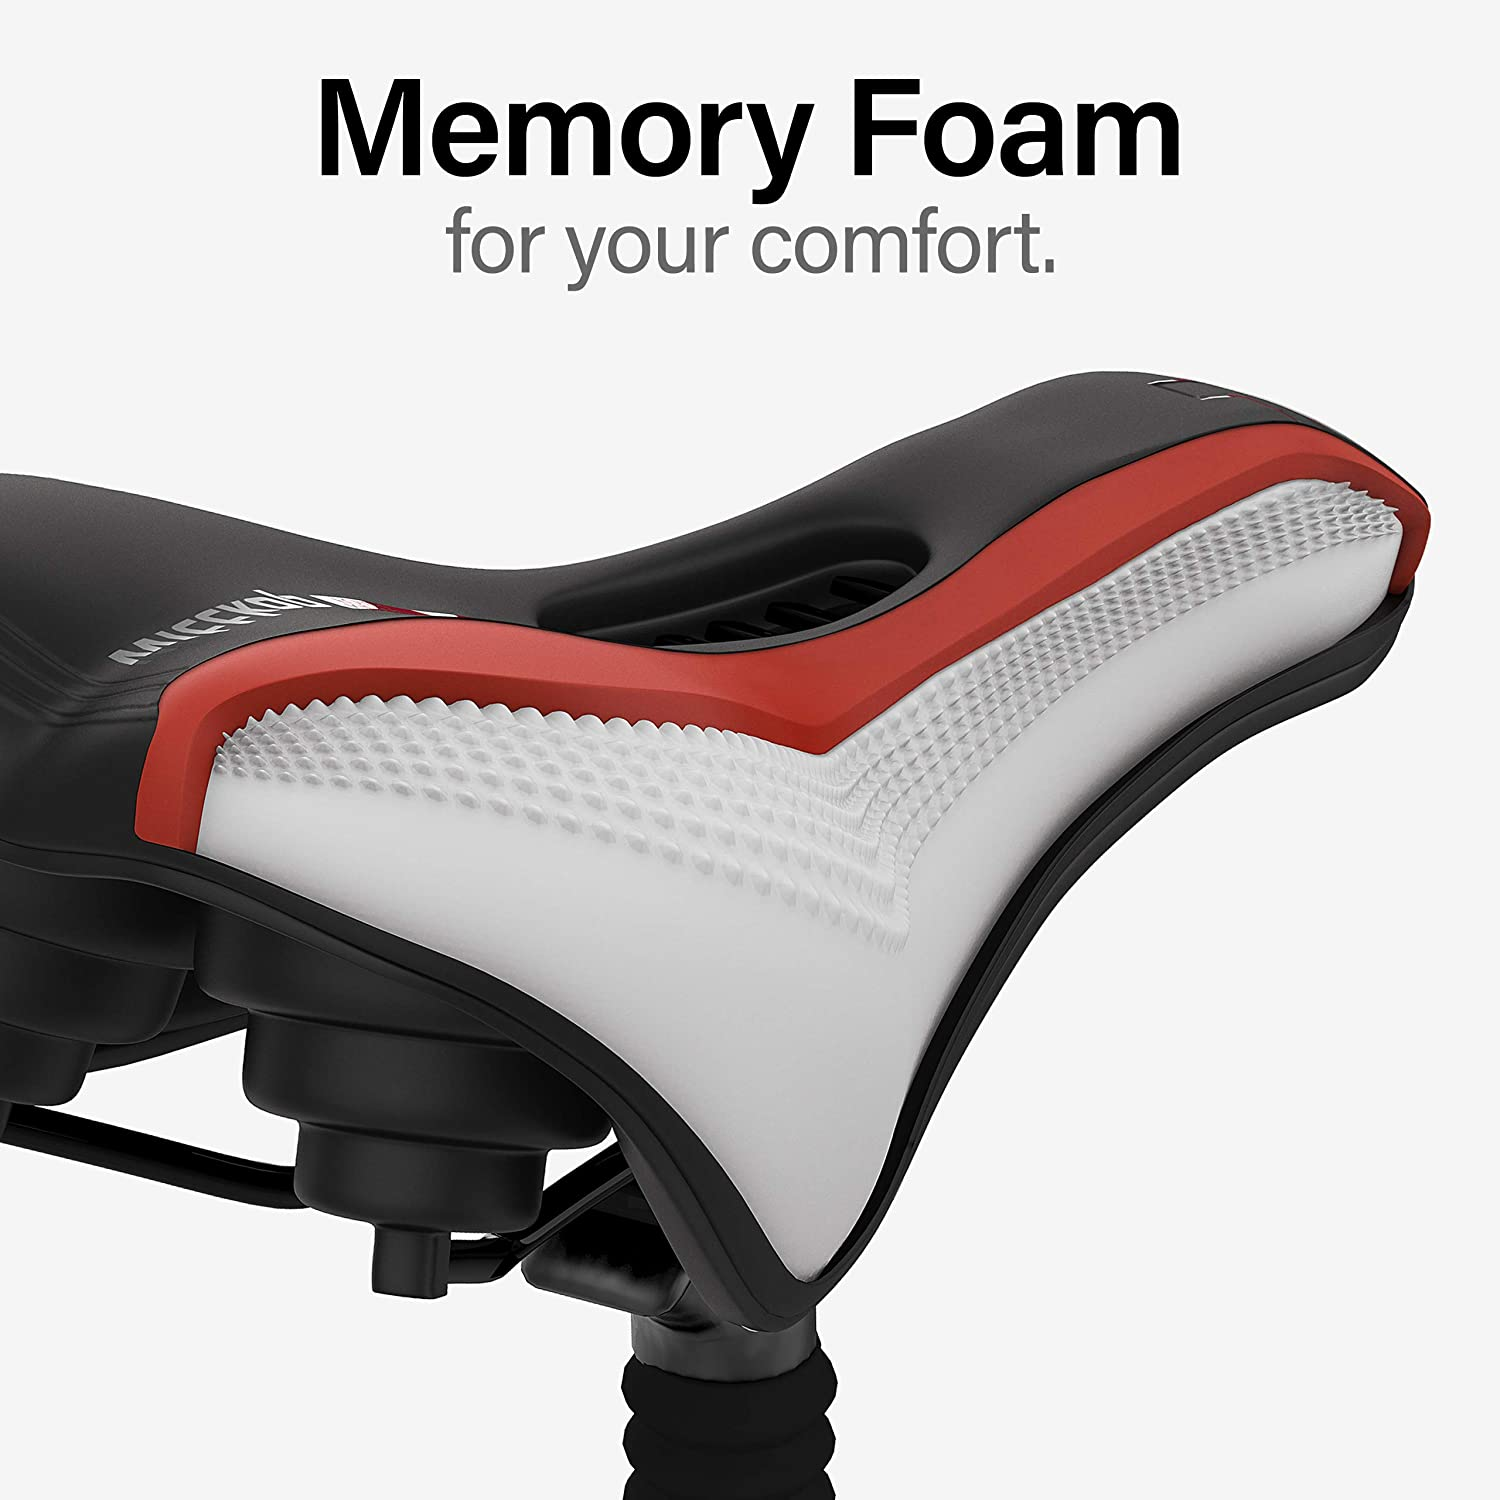 The price of a memory foam mountain bike saddle can actually be quite affordable.